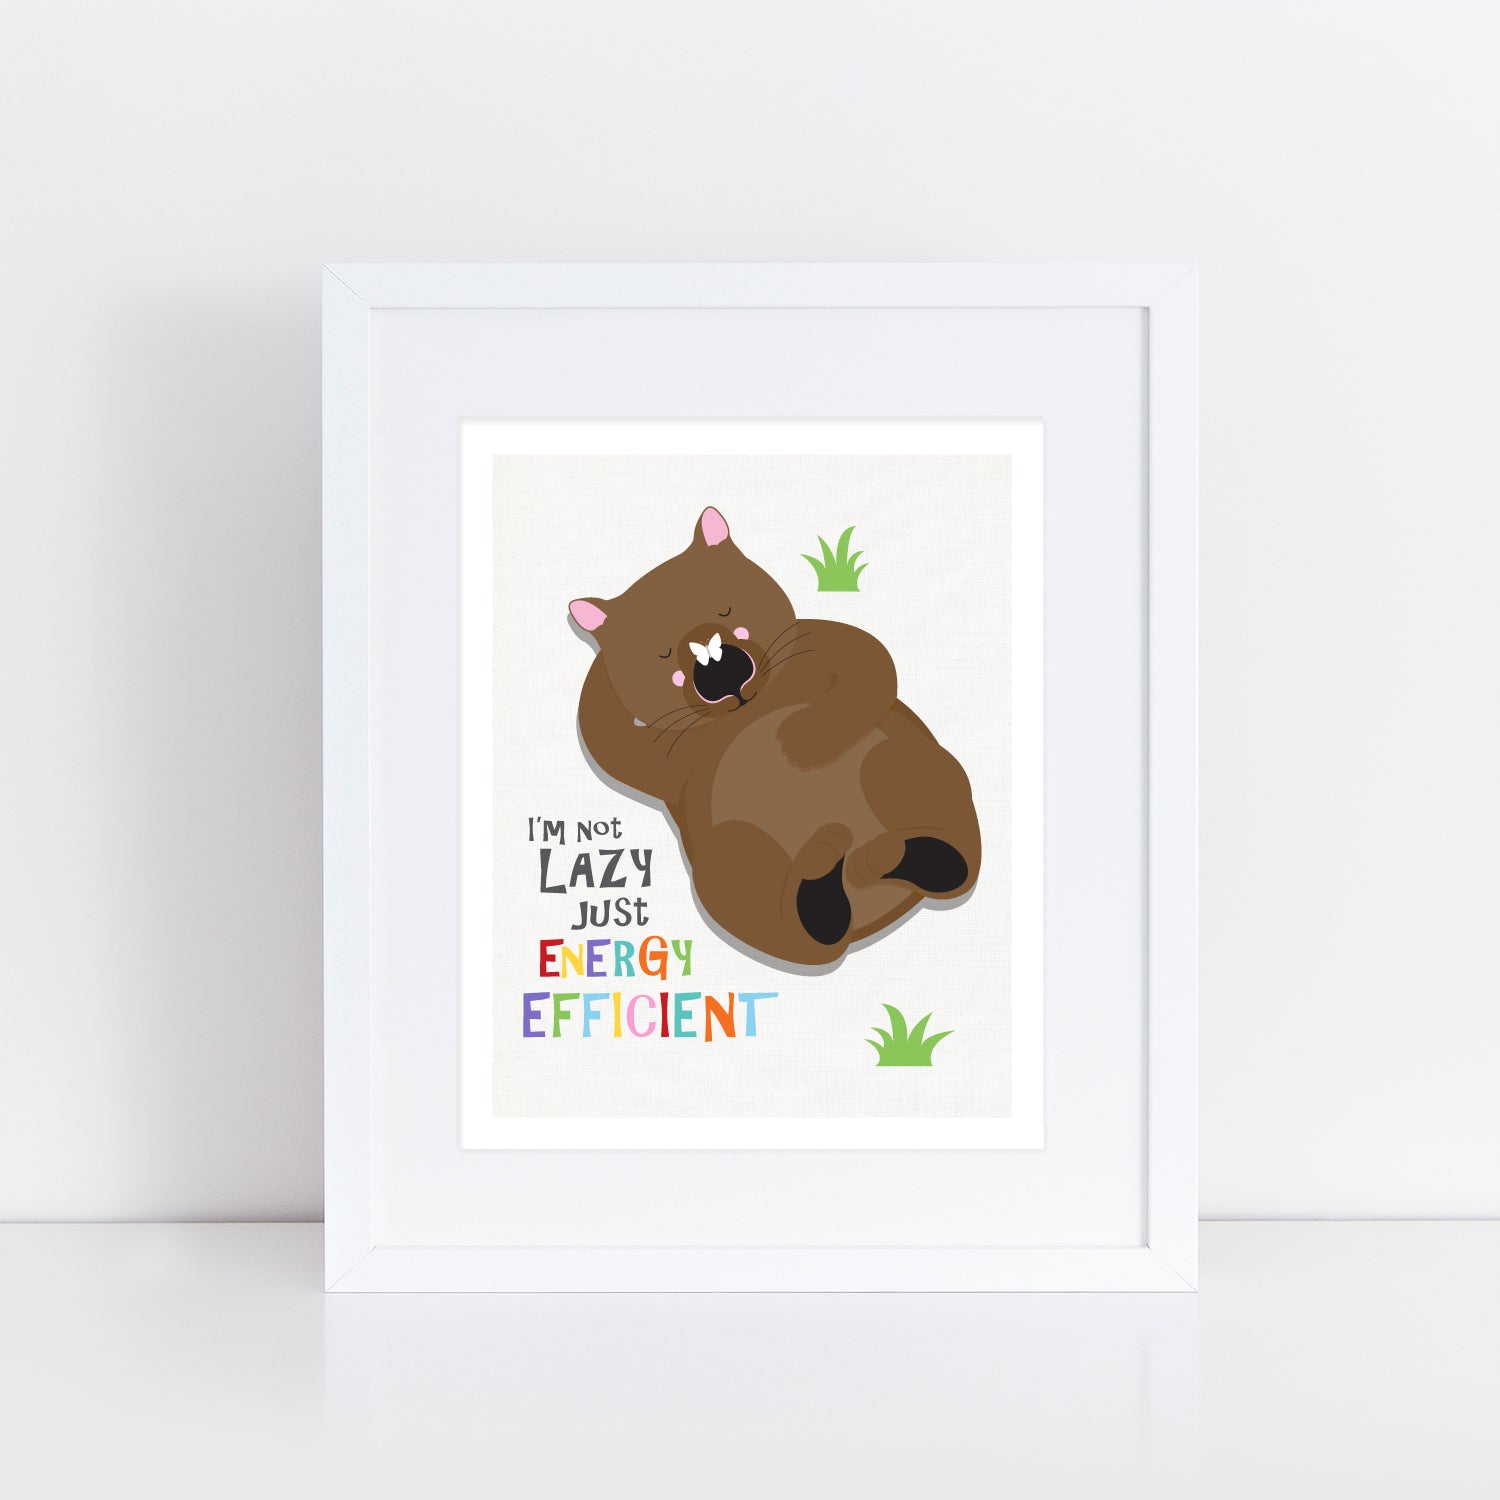 print of a wombat Lying around with a butterfly on it's nose and the cute quote "I'm not lazy just energy efficient."